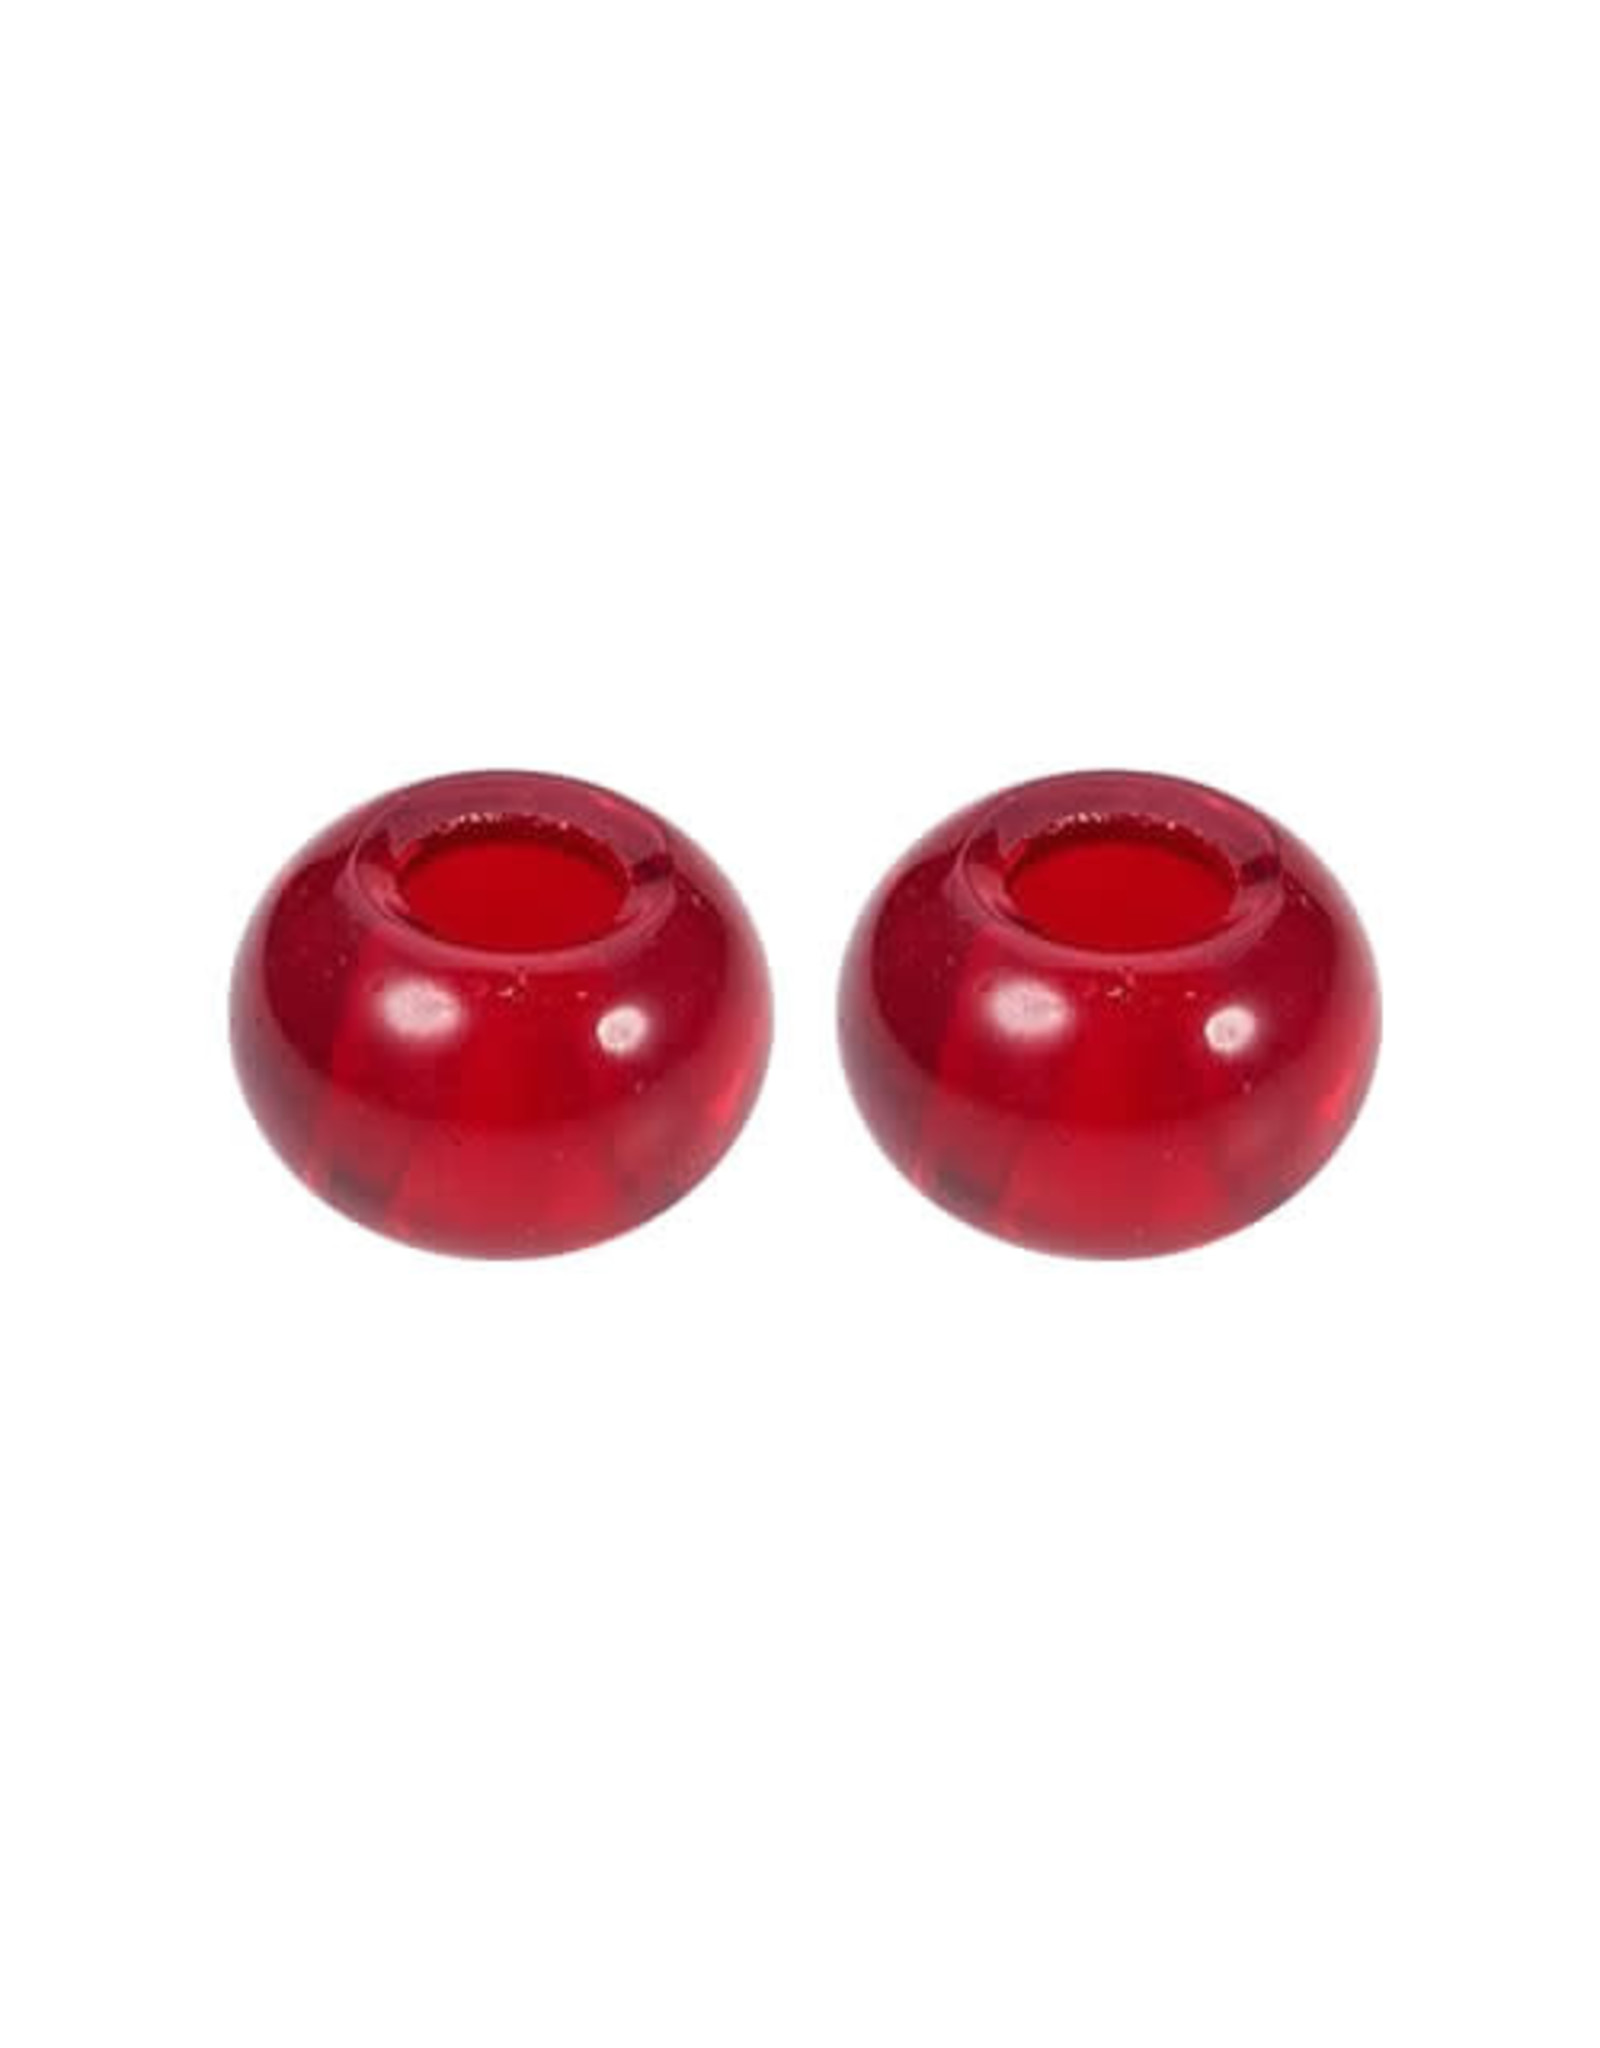 Rondelle  15x10mm Red  x10